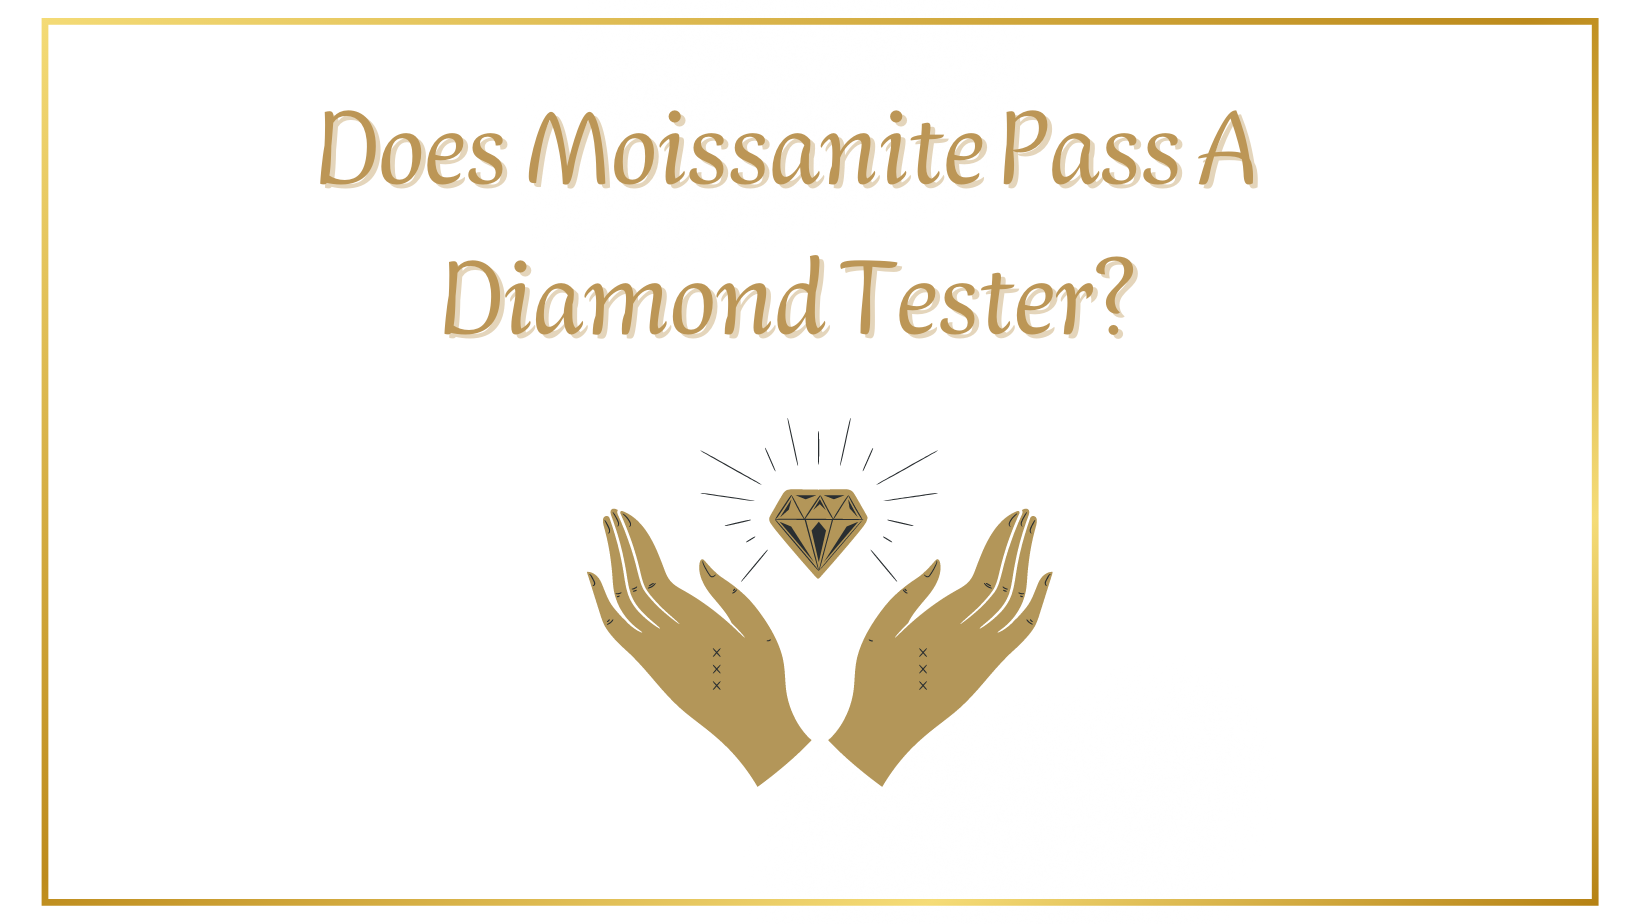 Does Moissanite Pass A Diamond Tester?